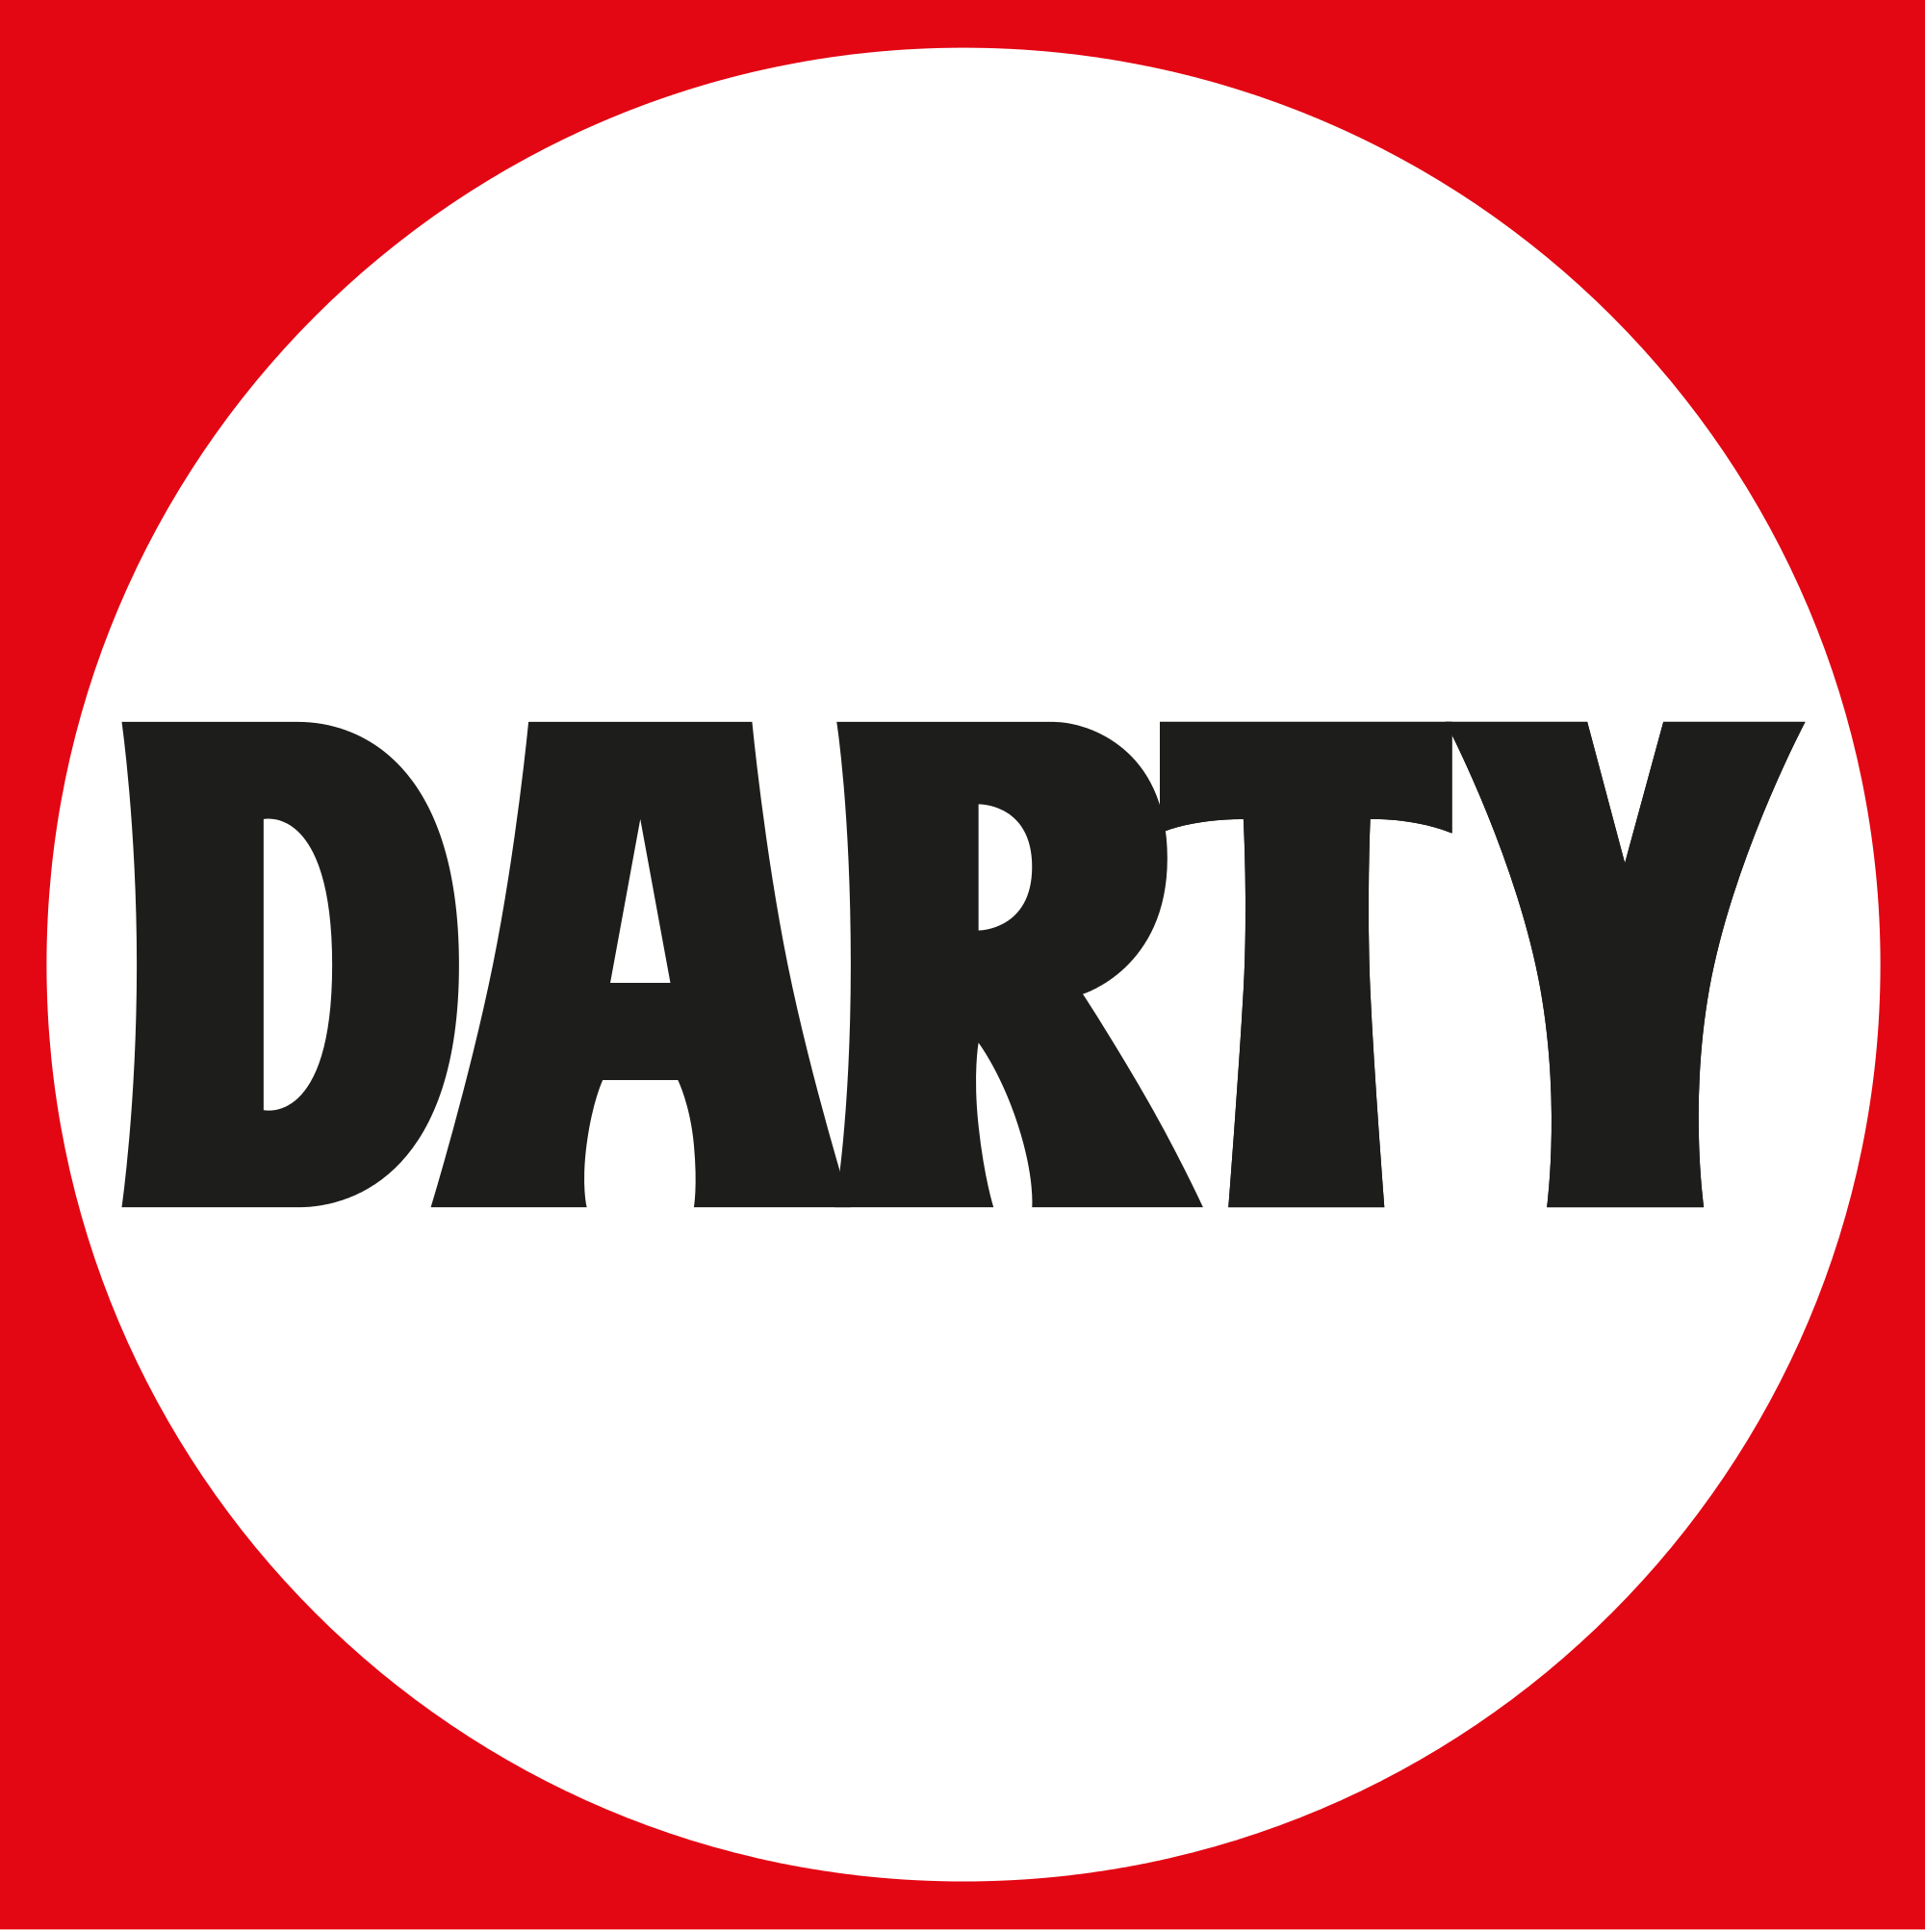 Darty.svg.png